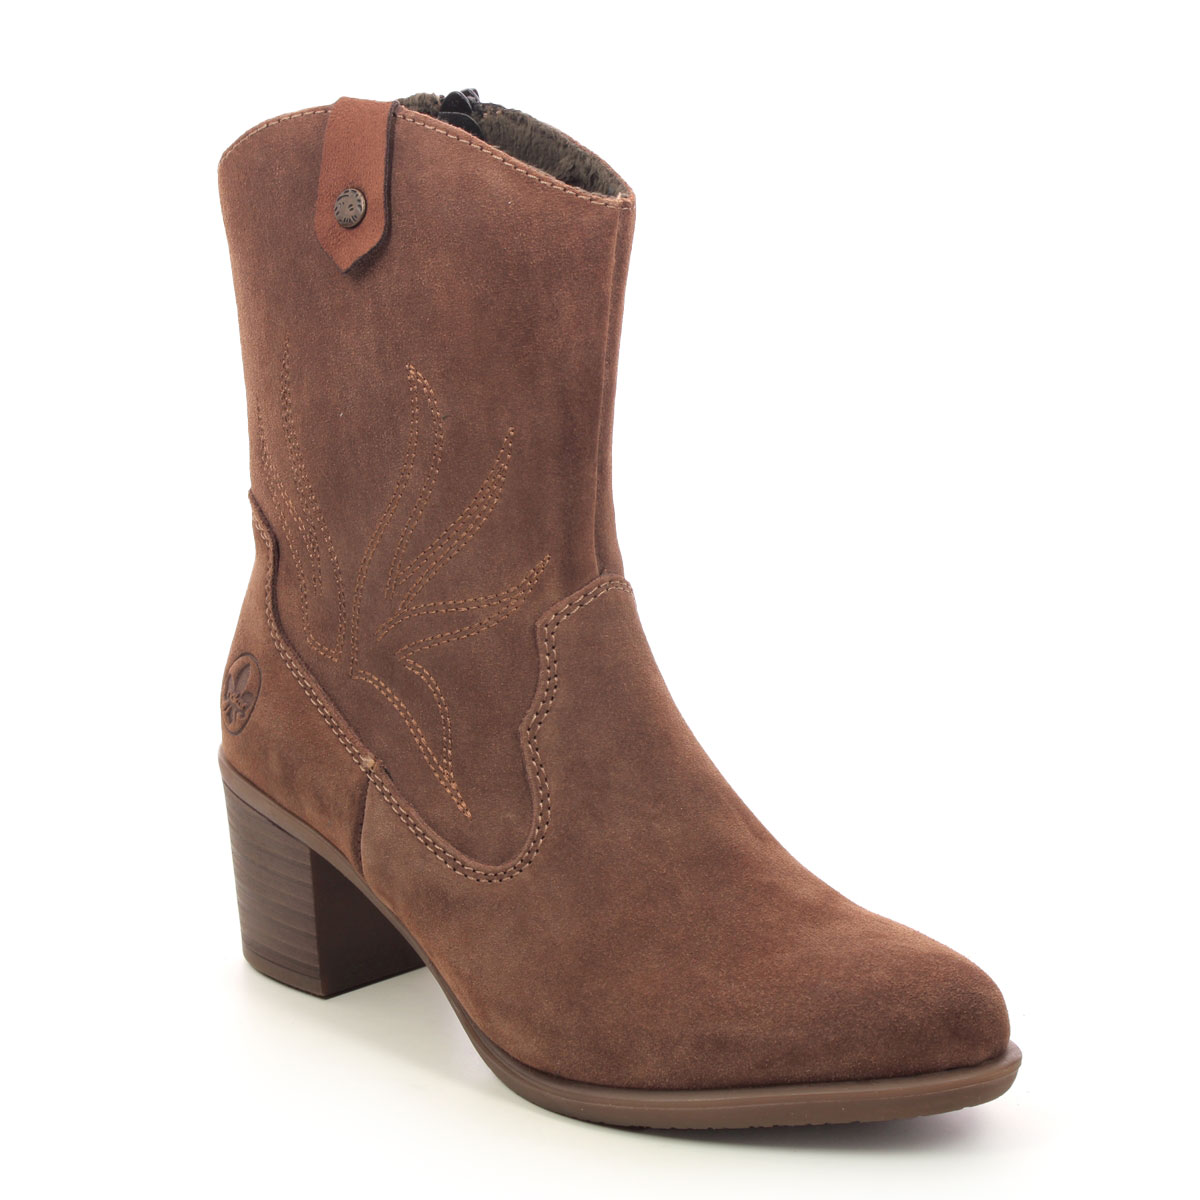 Rieker Saddle West Tan Suede Womens Ankle Boots Y2057-20 In Size 36 In Plain Tan Suede